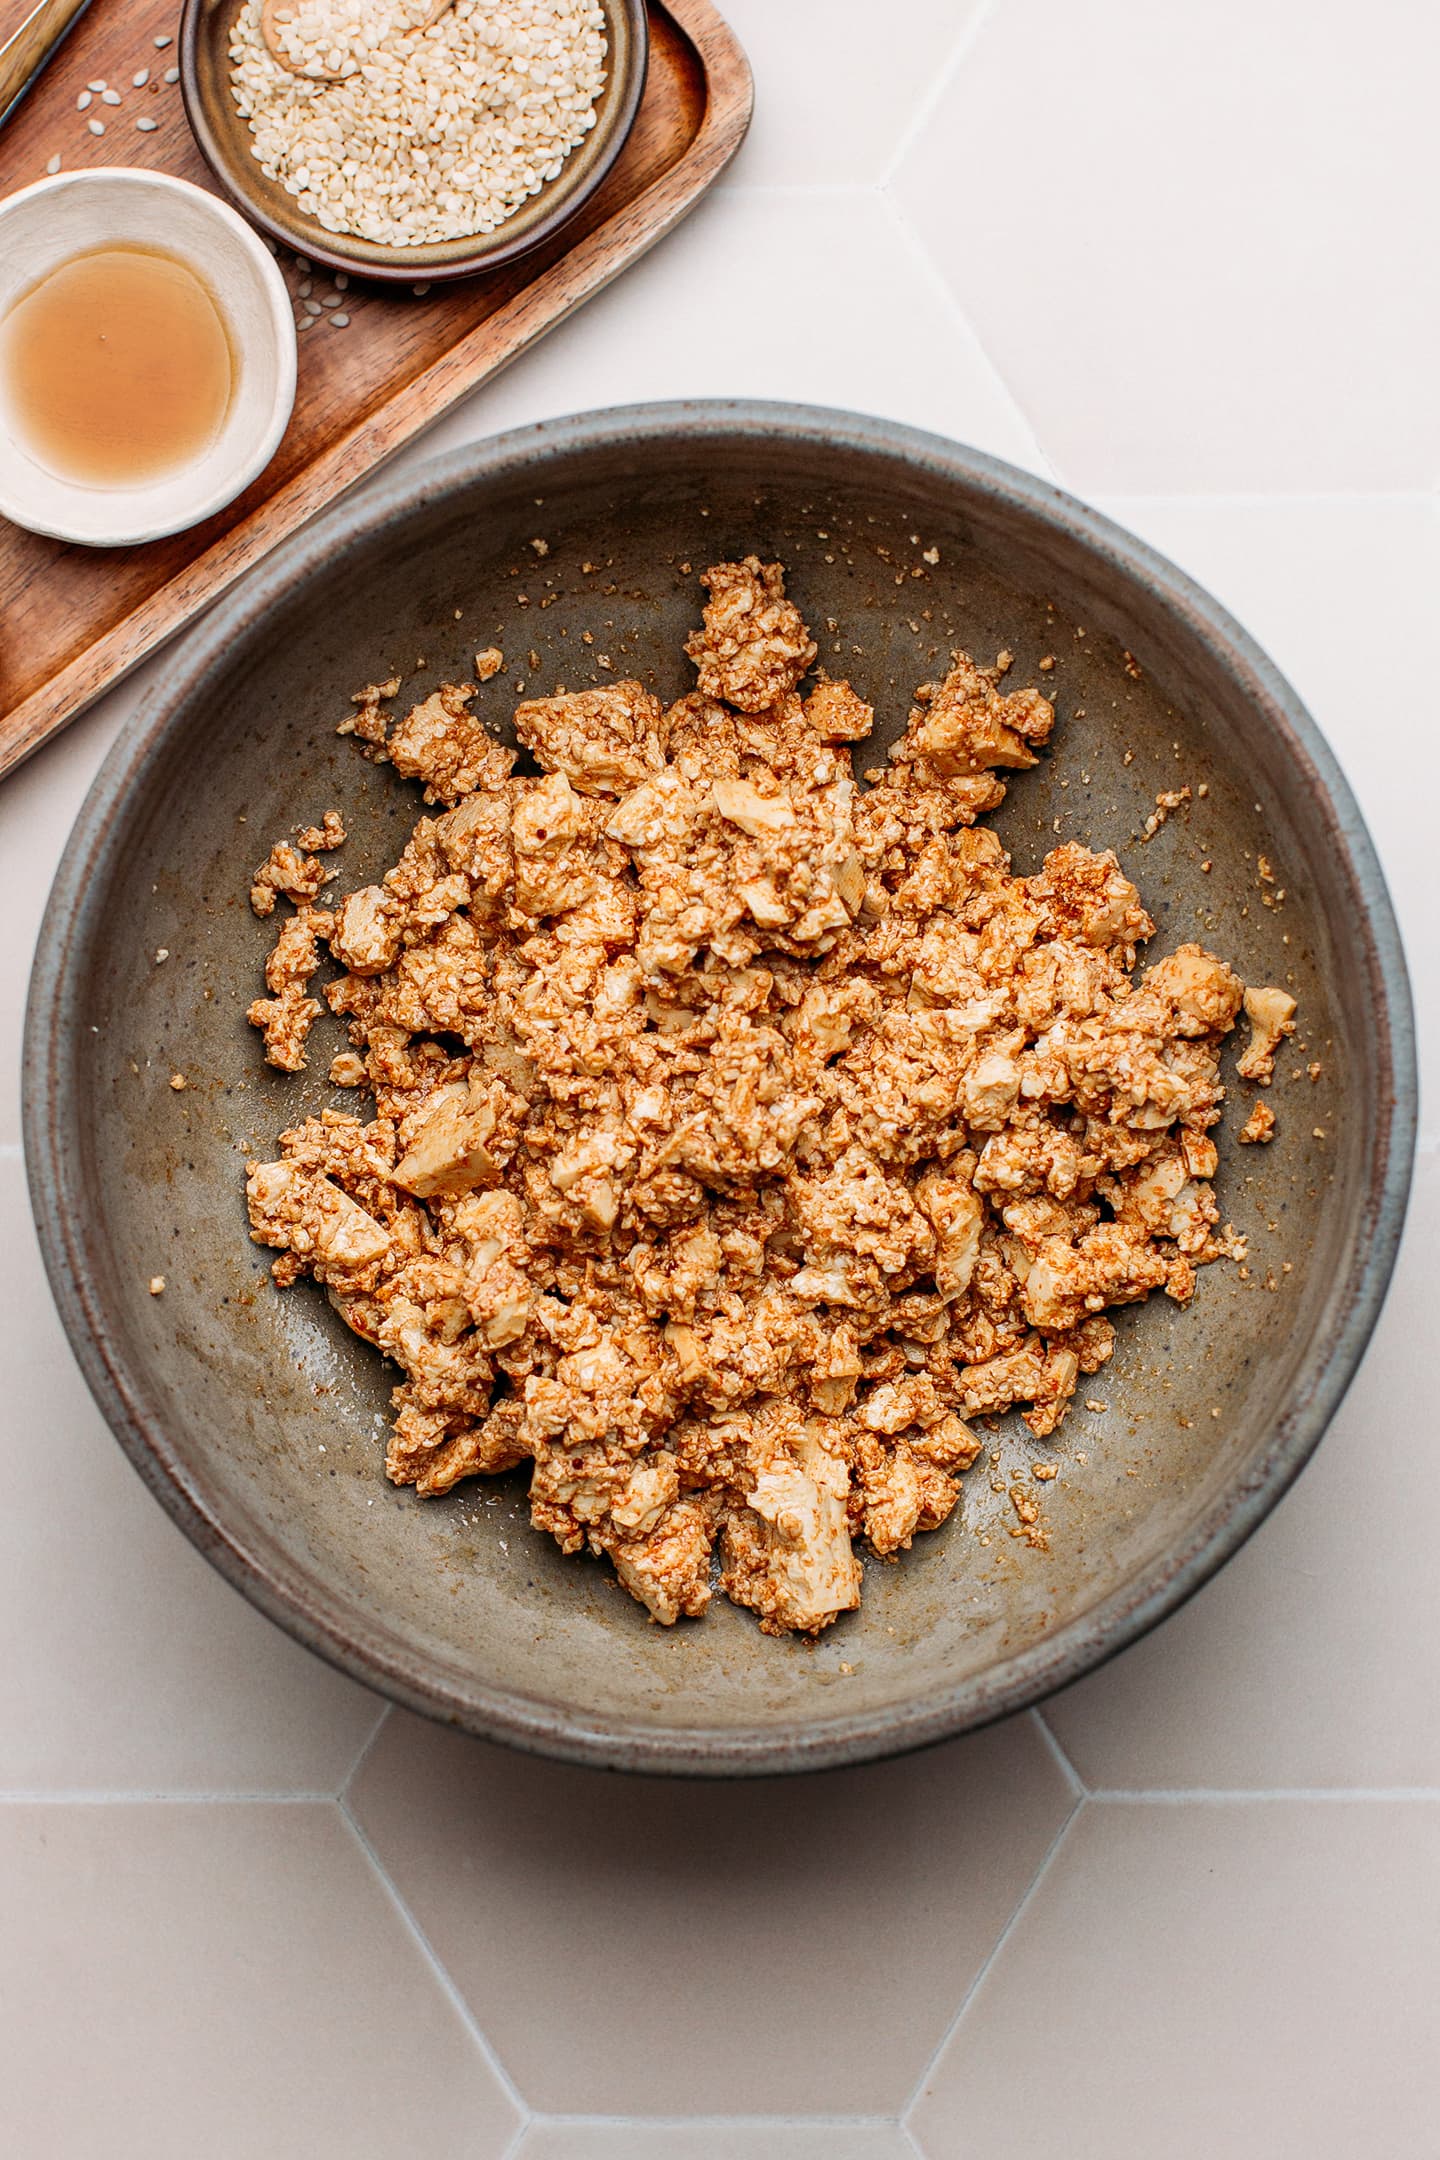 Scrambled tofu seasoned with smoked paprika and soy sauce in a bowl.